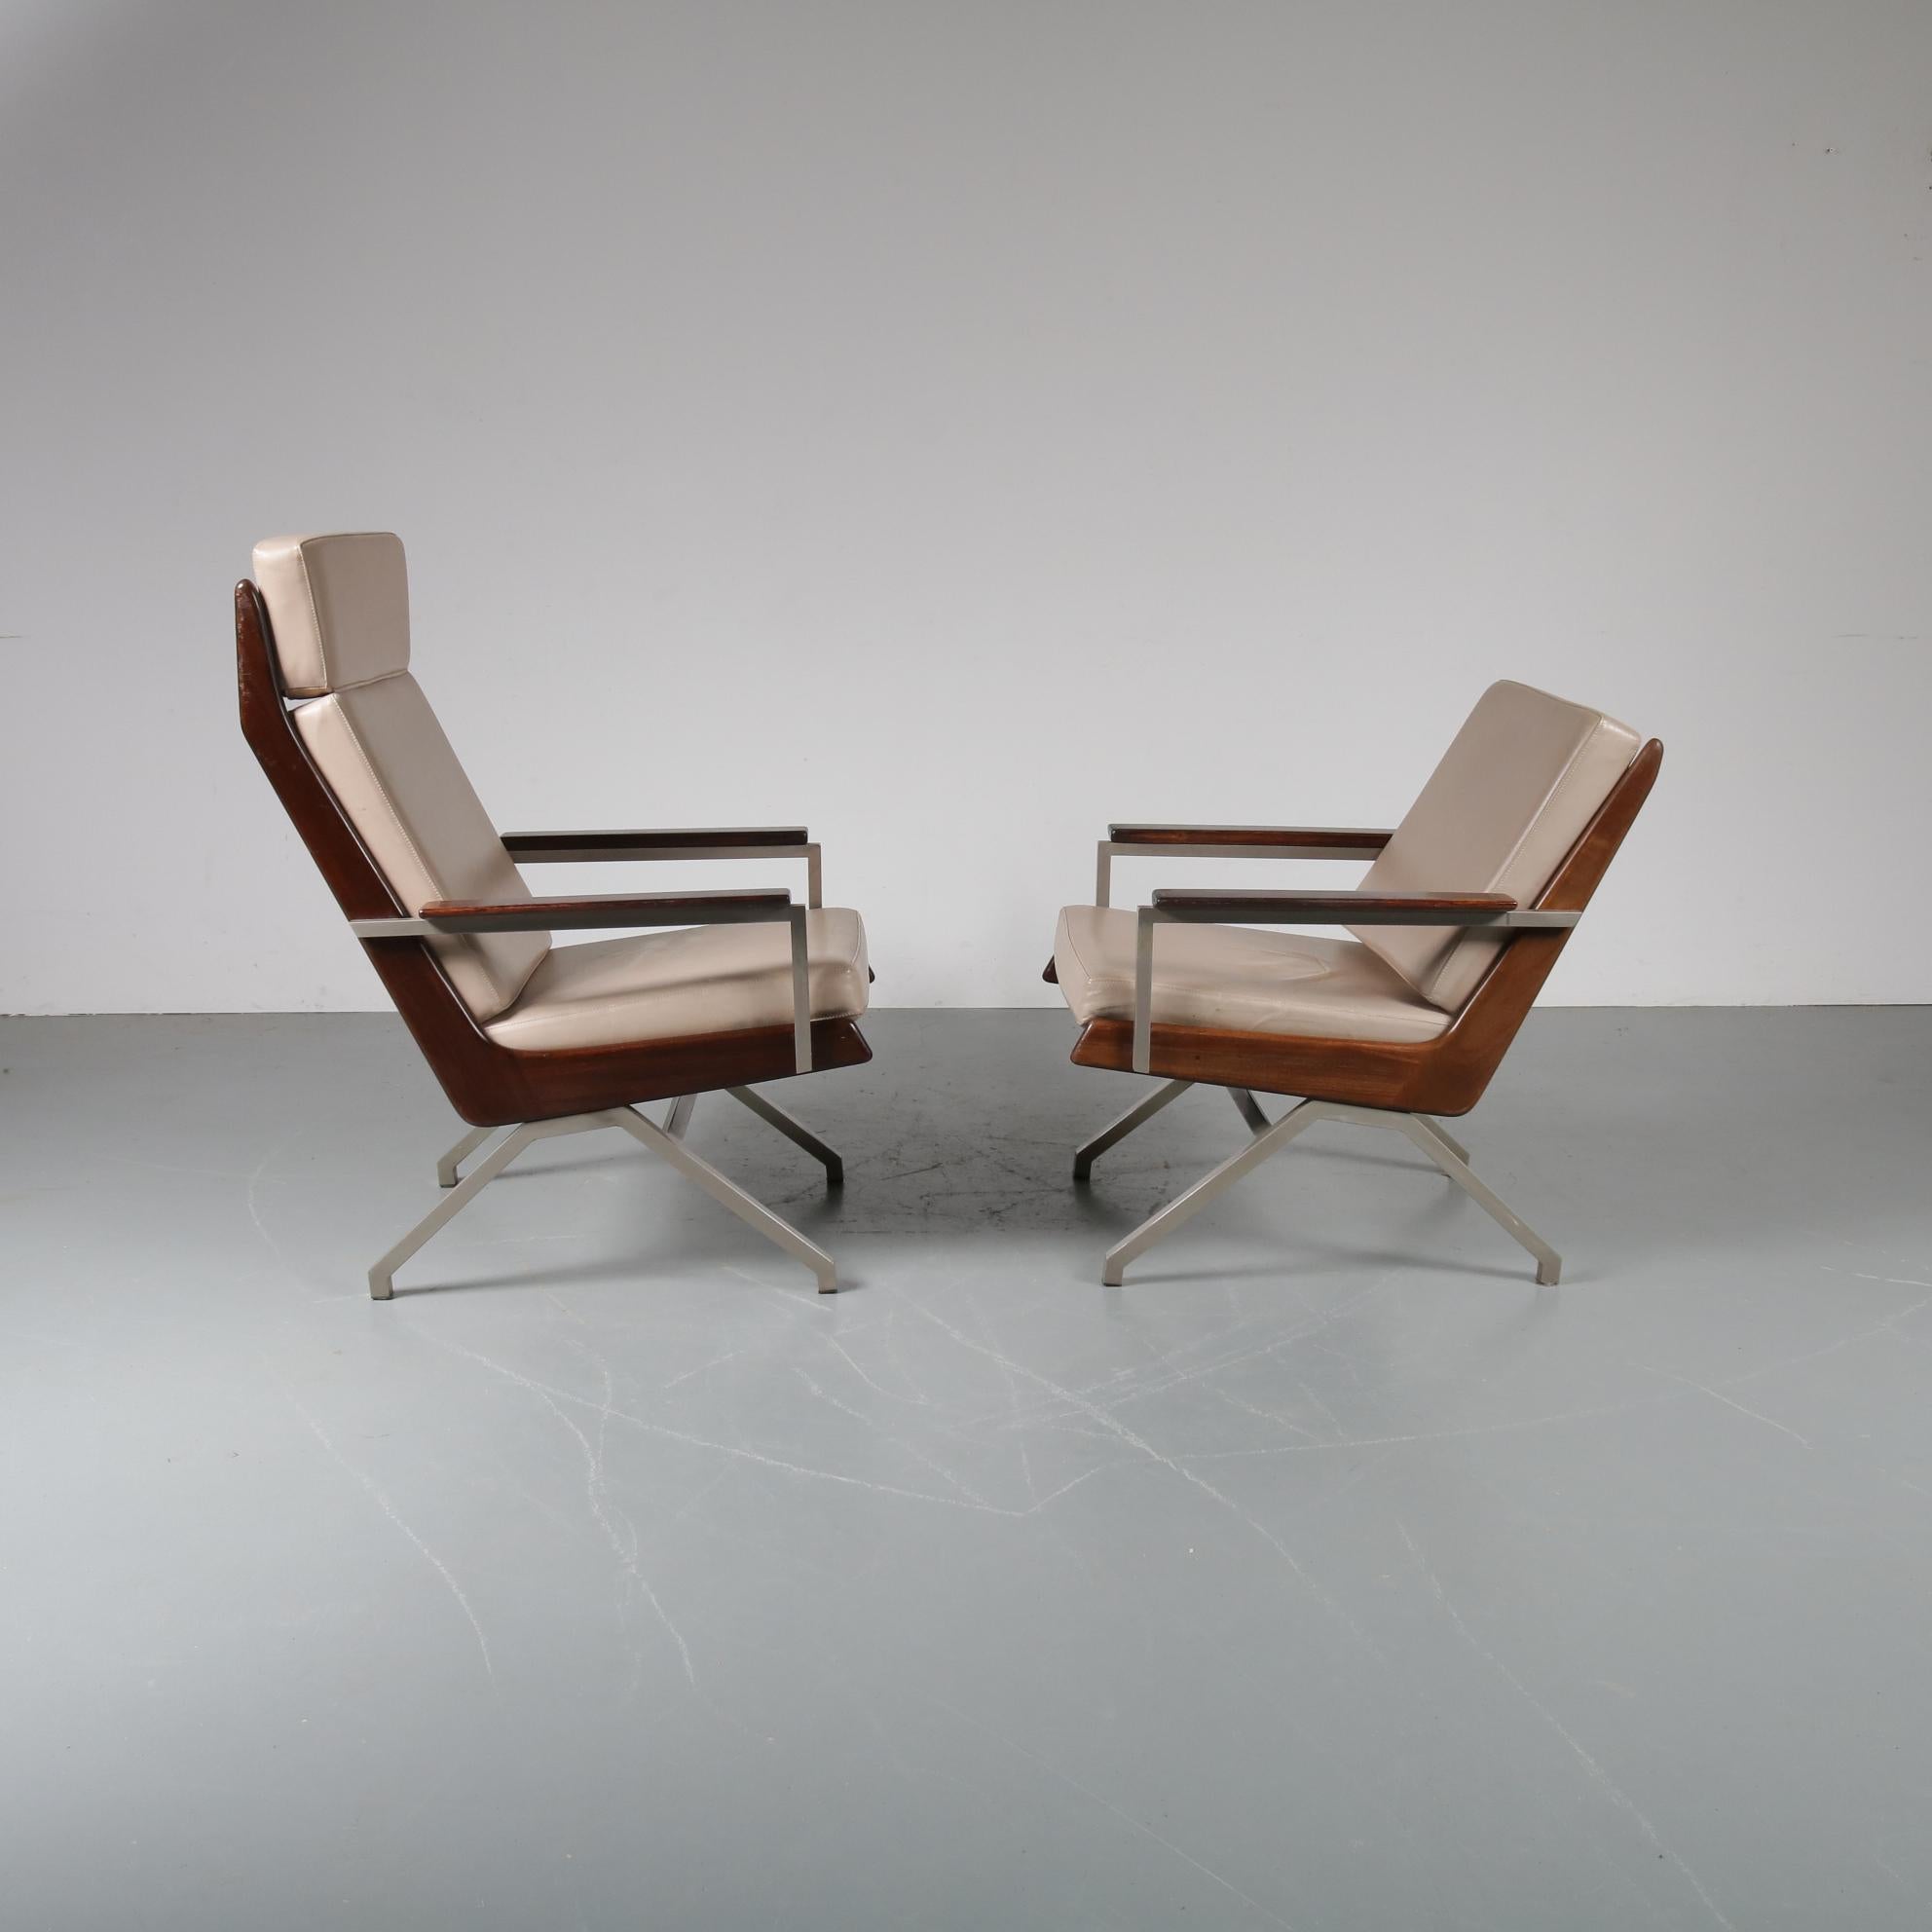 This is a beautiful pair of Dutch design lounge chairs designed by Rob Parry, manufactured by Gelderland in the Netherlands, circa 1960.

They have a beautiful grey metal base hand tropical hardwooden armrests. Upholstered in high quality beige